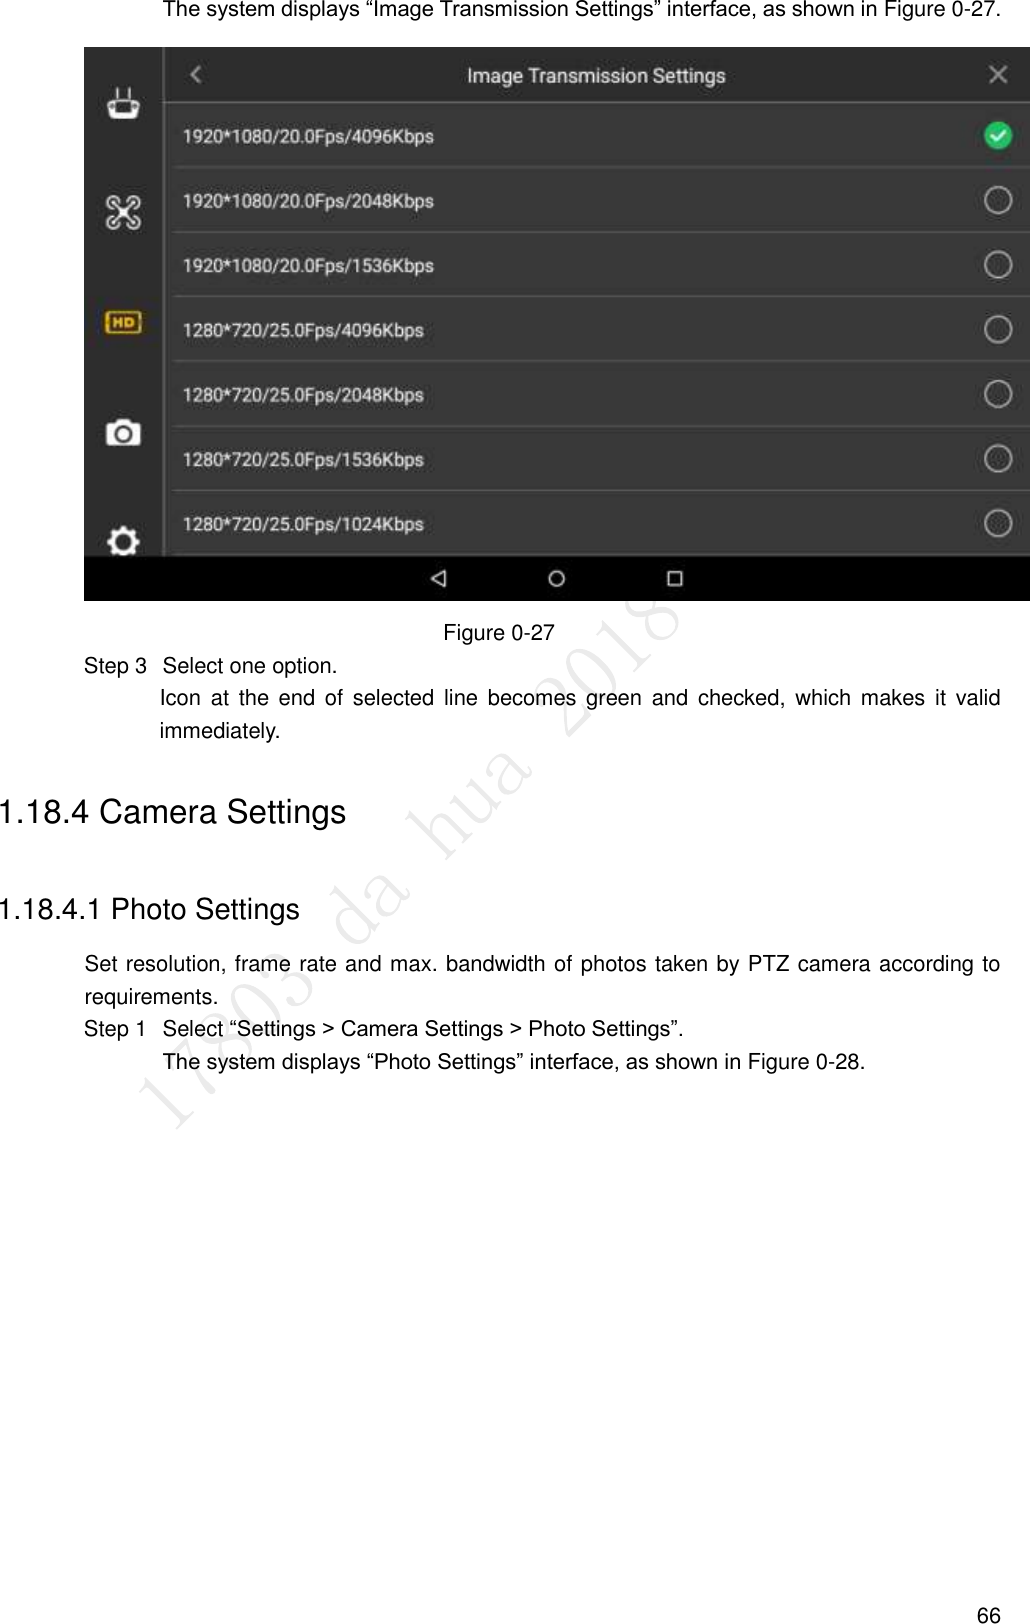  66 The system displays “Image Transmission Settings” interface, as shown in Figure 0-27.  Figure 0-27  Select one option.   Step 3Icon  at  the  end  of  selected  line  becomes  green  and  checked, which makes  it  valid immediately. 1.18.4 Camera Settings 1.18.4.1 Photo Settings Set resolution, frame rate and max. bandwidth of photos taken by PTZ camera according to requirements.   Select “Settings &gt; Camera Settings &gt; Photo Settings”. Step 1The system displays “Photo Settings” interface, as shown in Figure 0-28. 